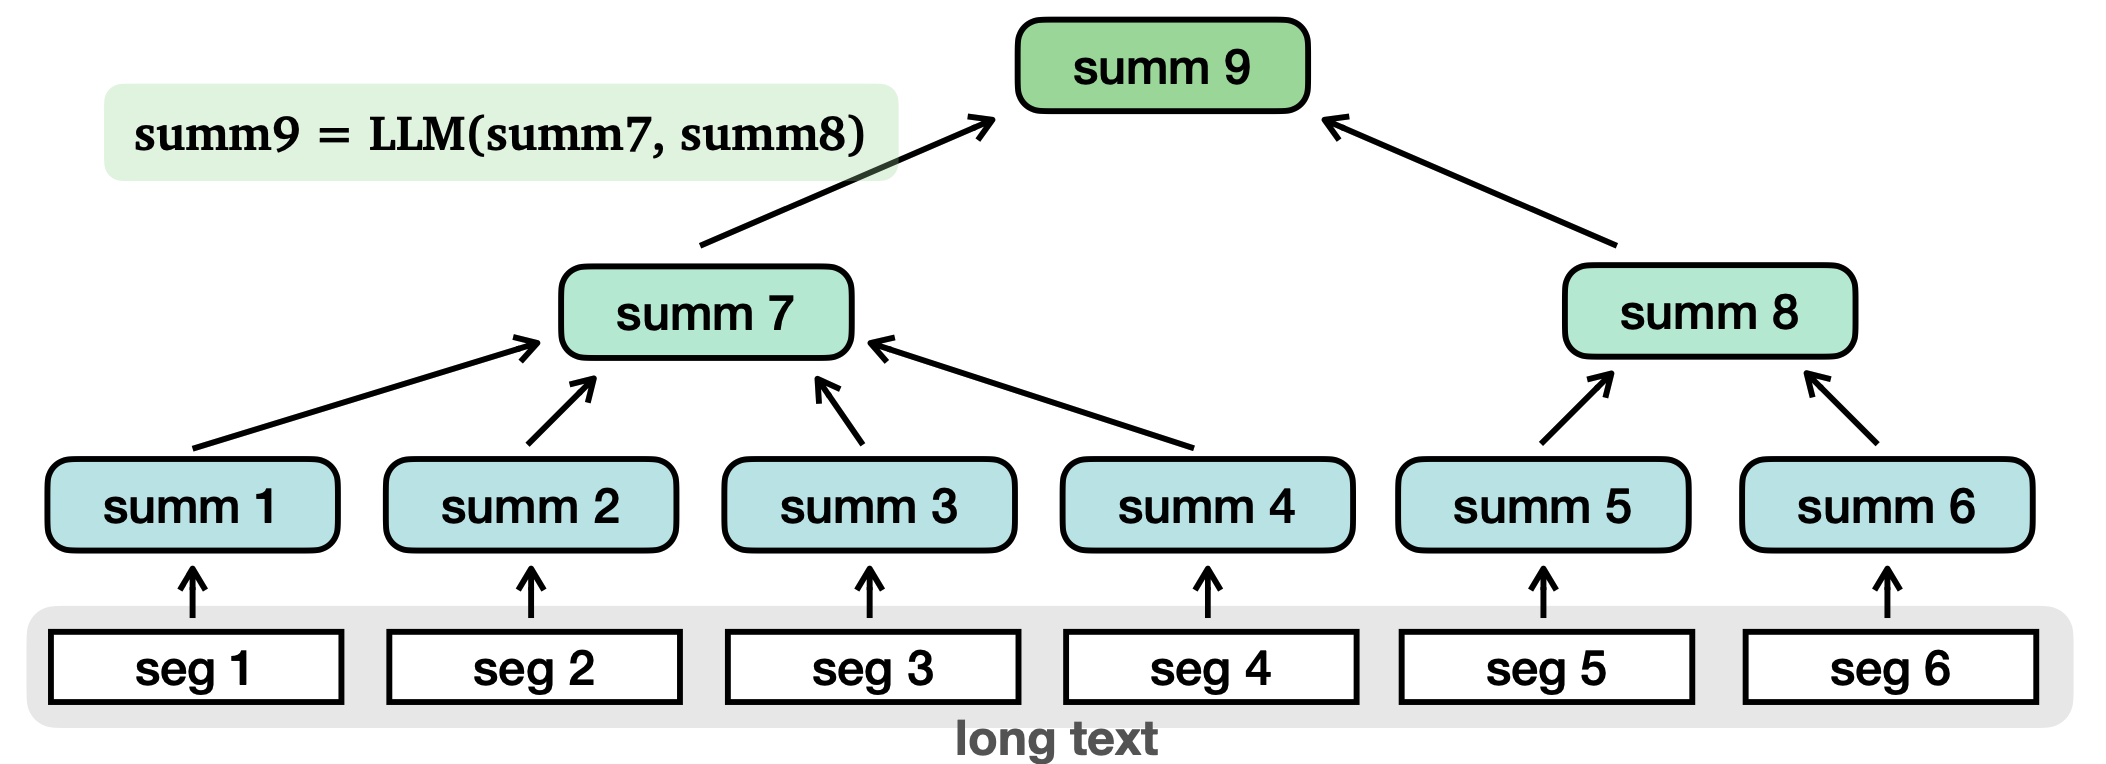 This is how a tree of summaries looks like in theory.